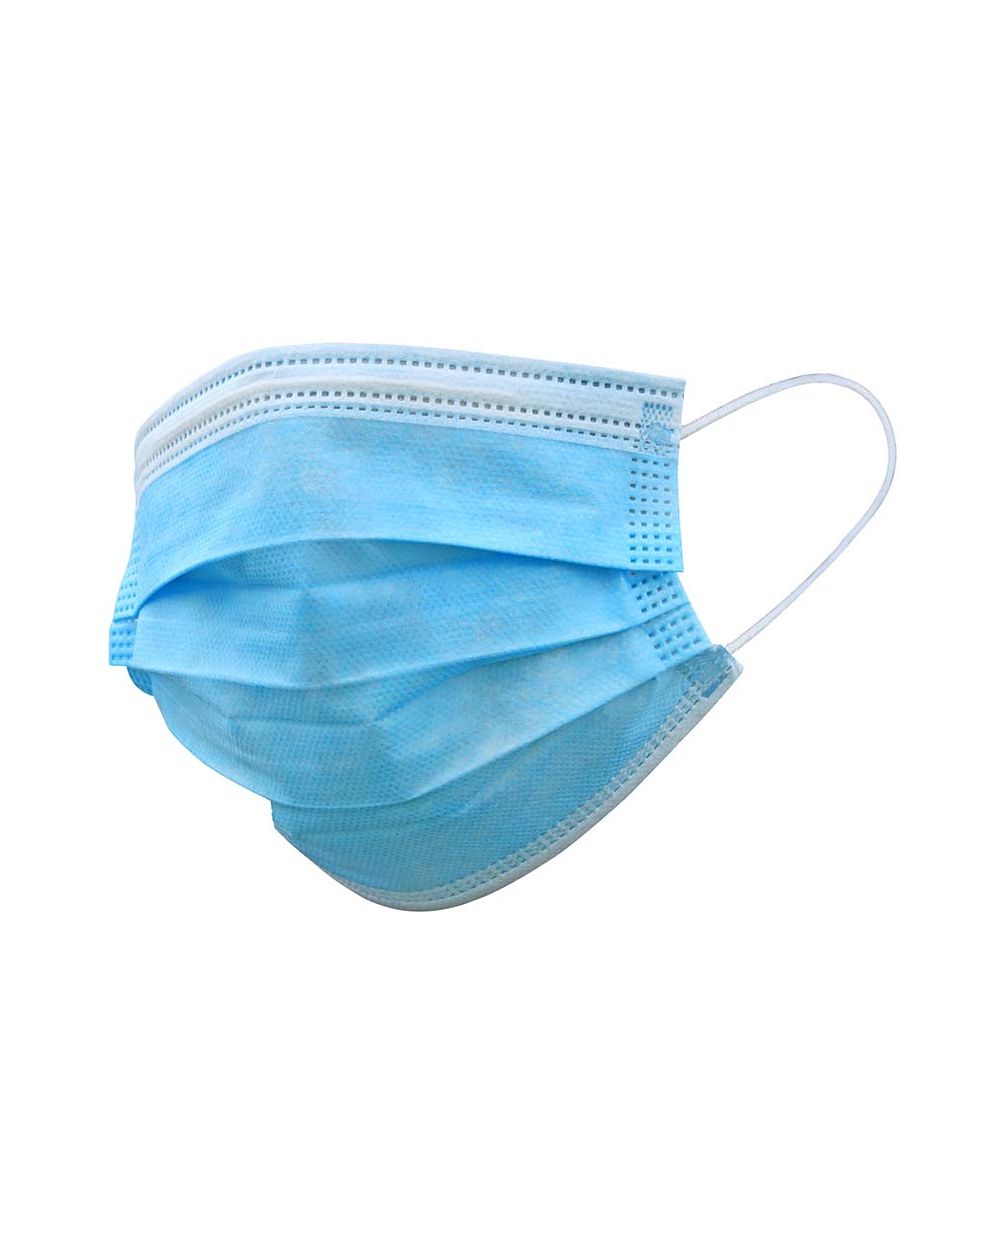 Disposable Type IIR Medical Mask Bx 50 - LA Safety